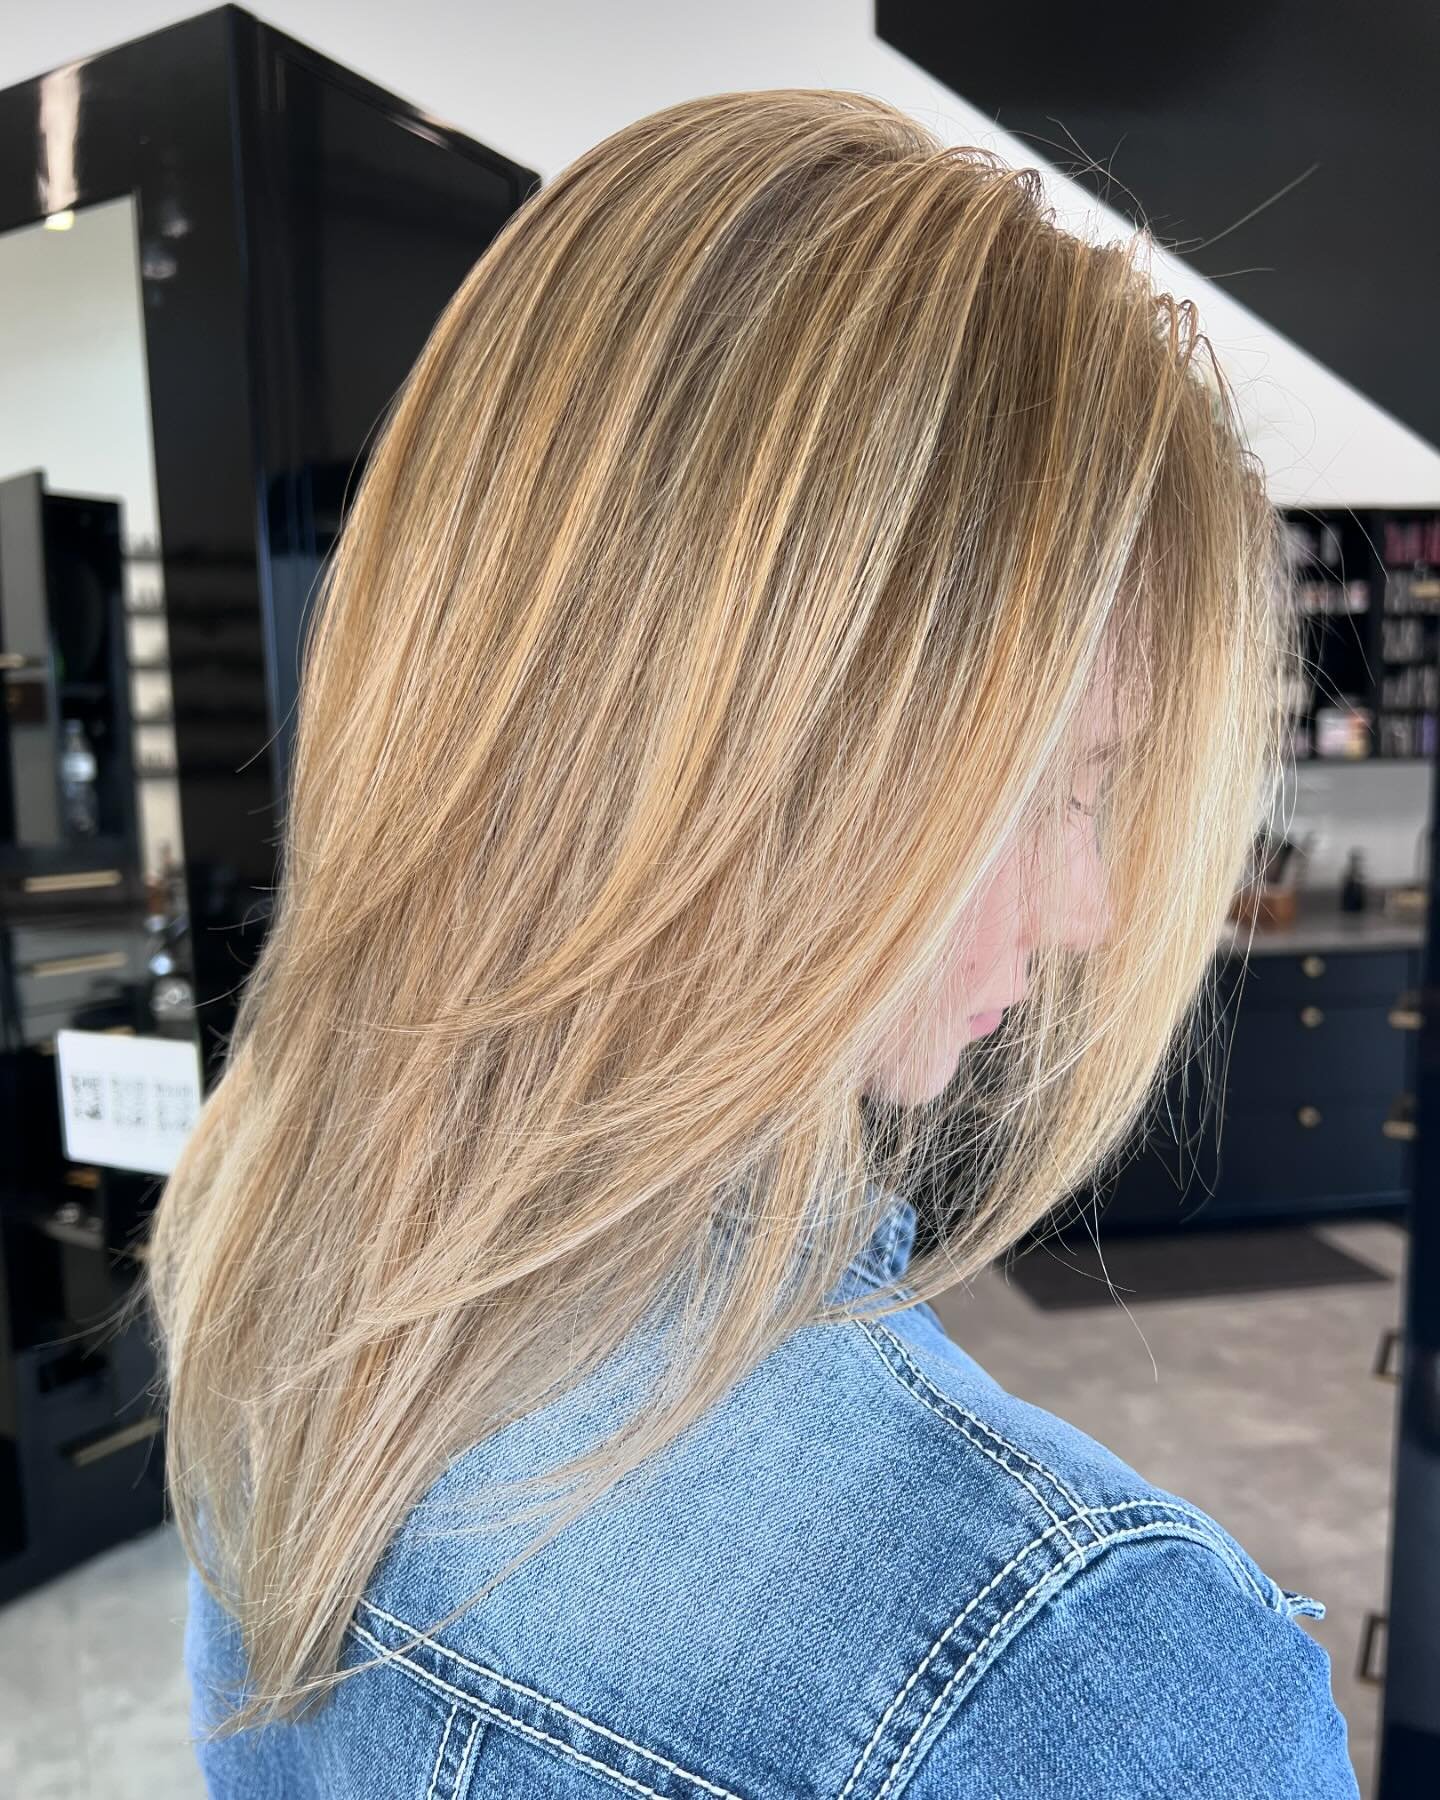 I didn&rsquo;t get her hair as blonde as she wanted. 

I know what you&rsquo;re thinking ... &ldquo;it looks great to me! I would be happy with that.&rdquo; 

I know, it looks beautiful too... but Macy wants it brighter. And in order to do that, we h